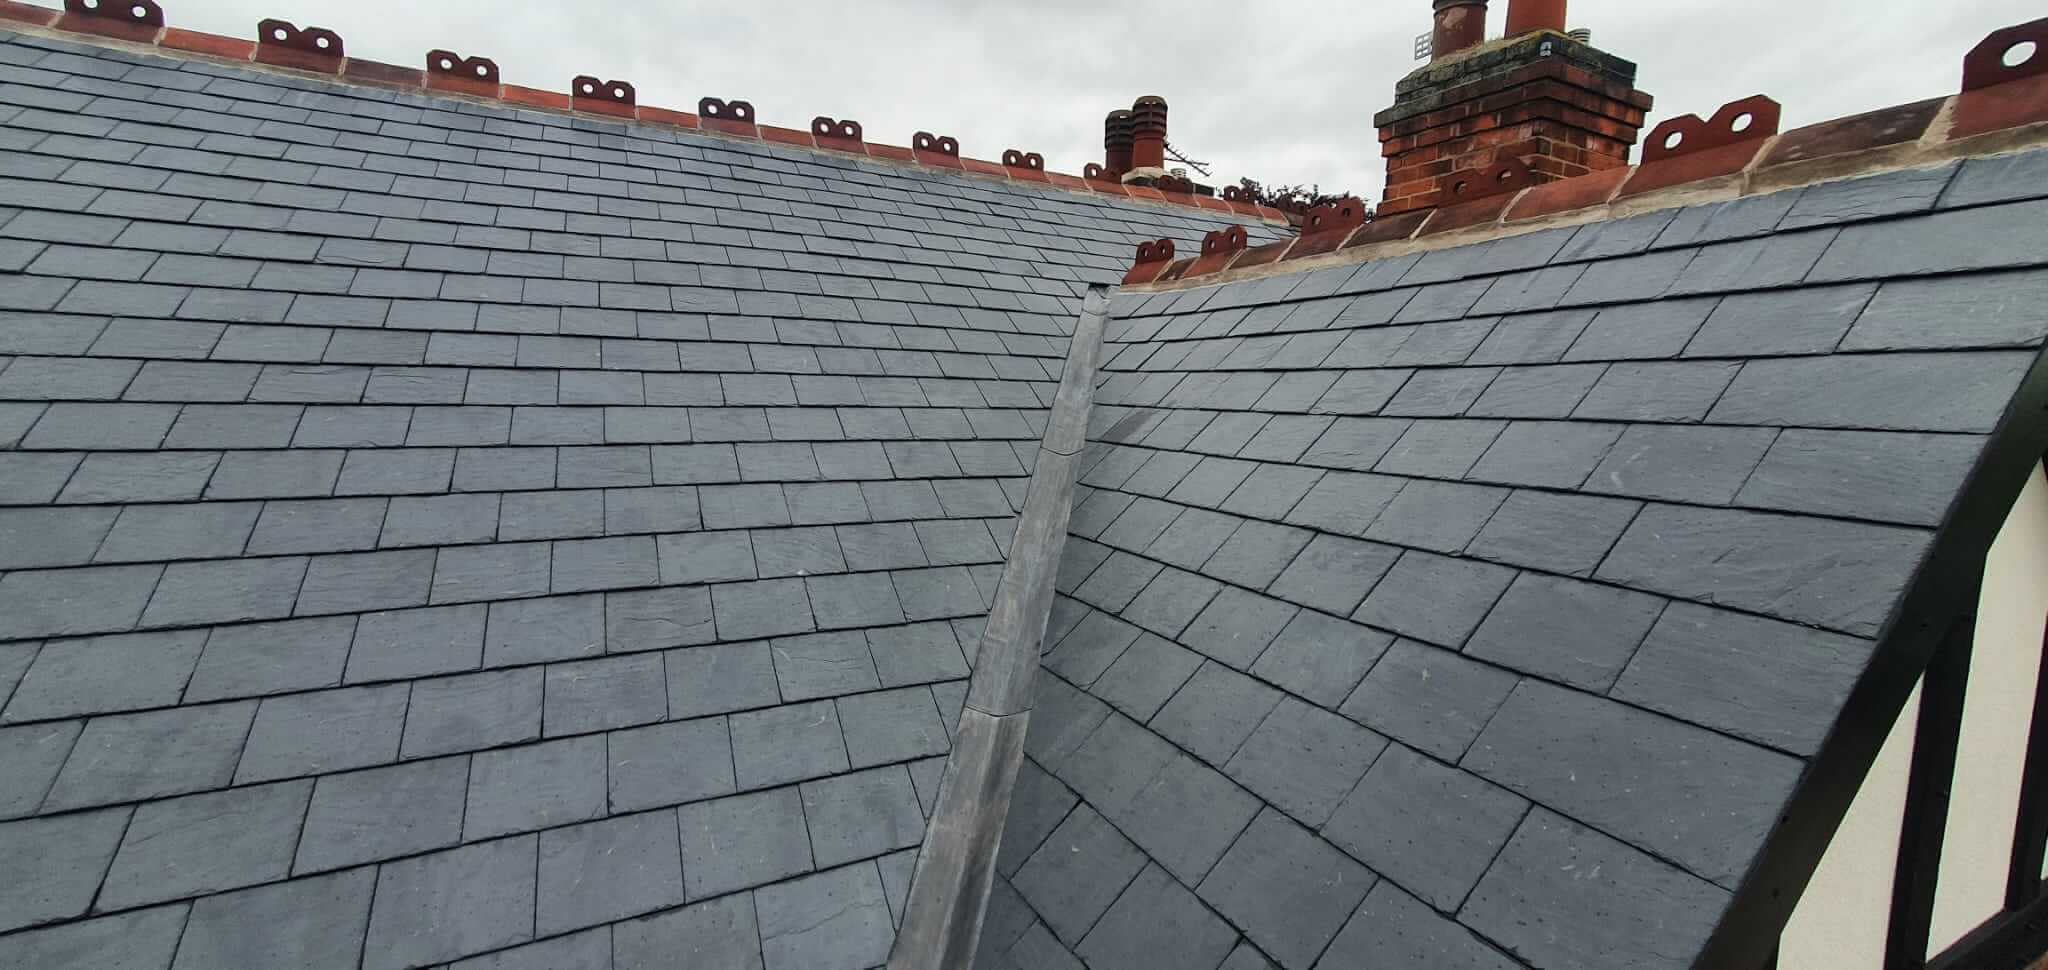 M&S roofing finished house tiles